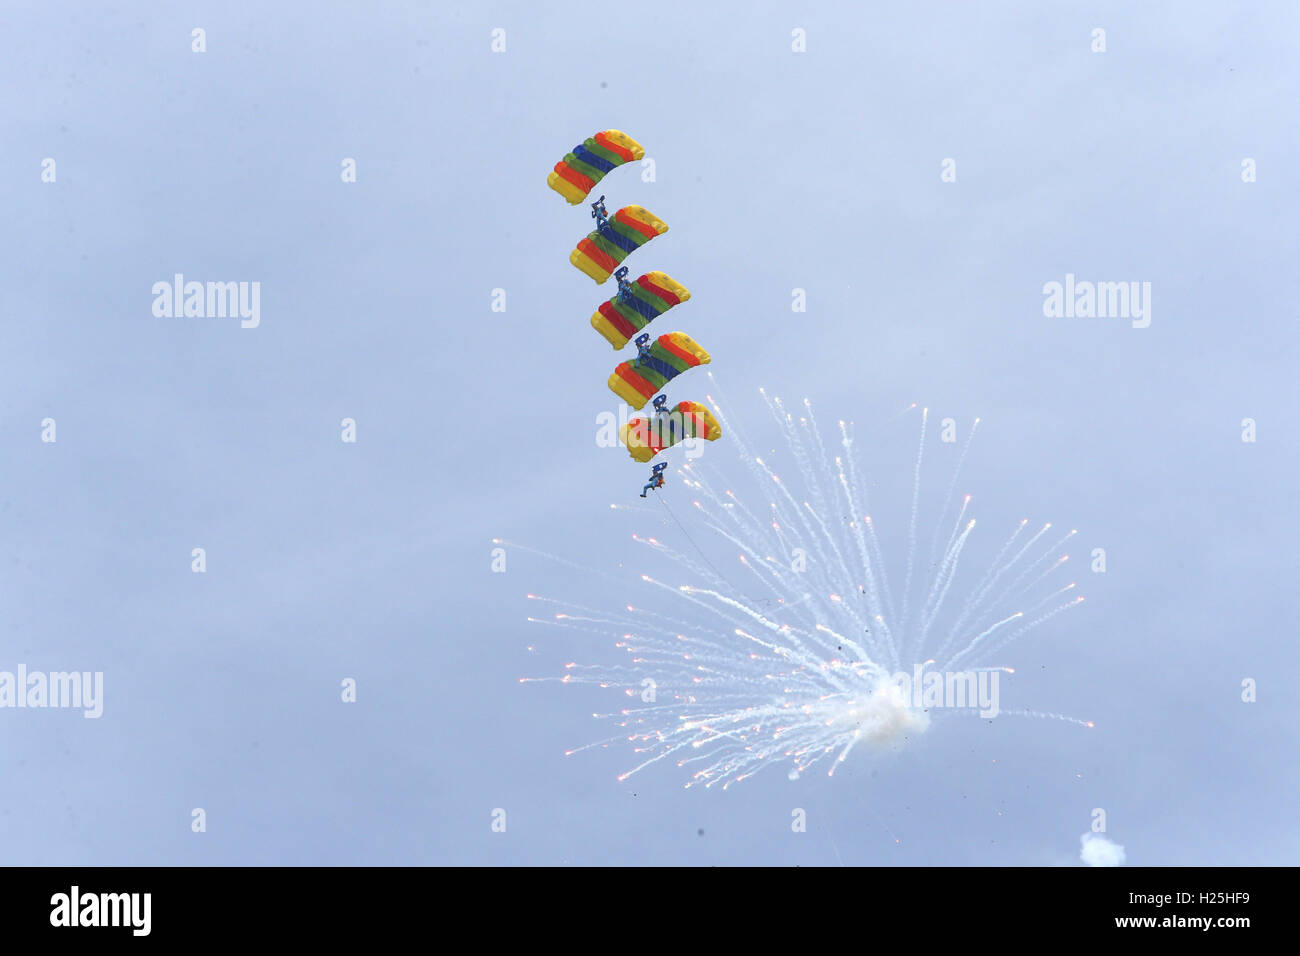 Pyongyang. 25th Sep, 2016. Parachutists perform during an international air show in Wonsan, the Democratic People's Republic of Korea (DPRK), on Sept. 25, 2016, the second day of the international air show. The Wonsan International Friendship Air Festival, the first of its kind in the DPRK, runs from Saturday through Sunday at Kalma International Airport, which was redesigned and reconstructed from a military airfield to promote tourism. Credit:  Guo Yina/Xinhua/Alamy Live News Stock Photo